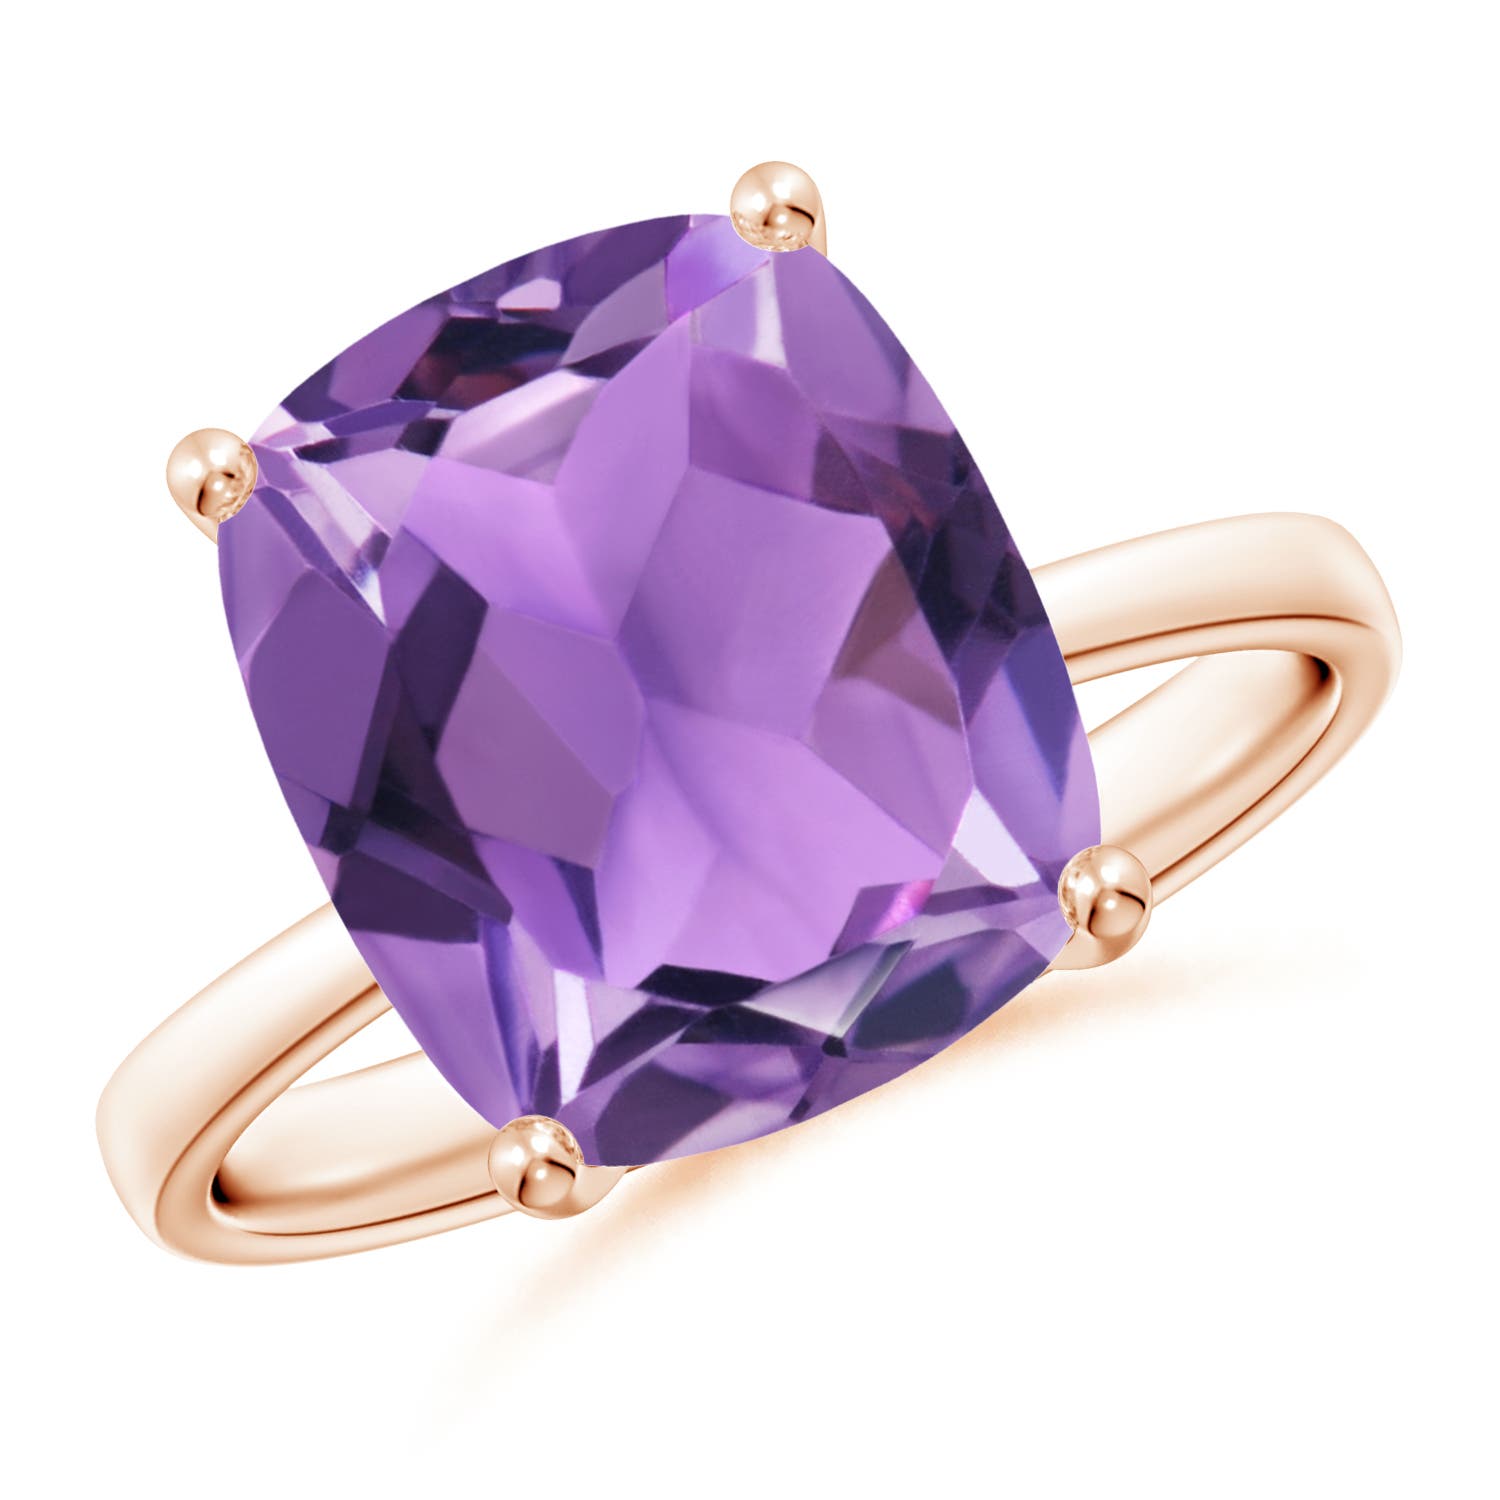 AA - Amethyst / 4.6 CT / 14 KT Rose Gold